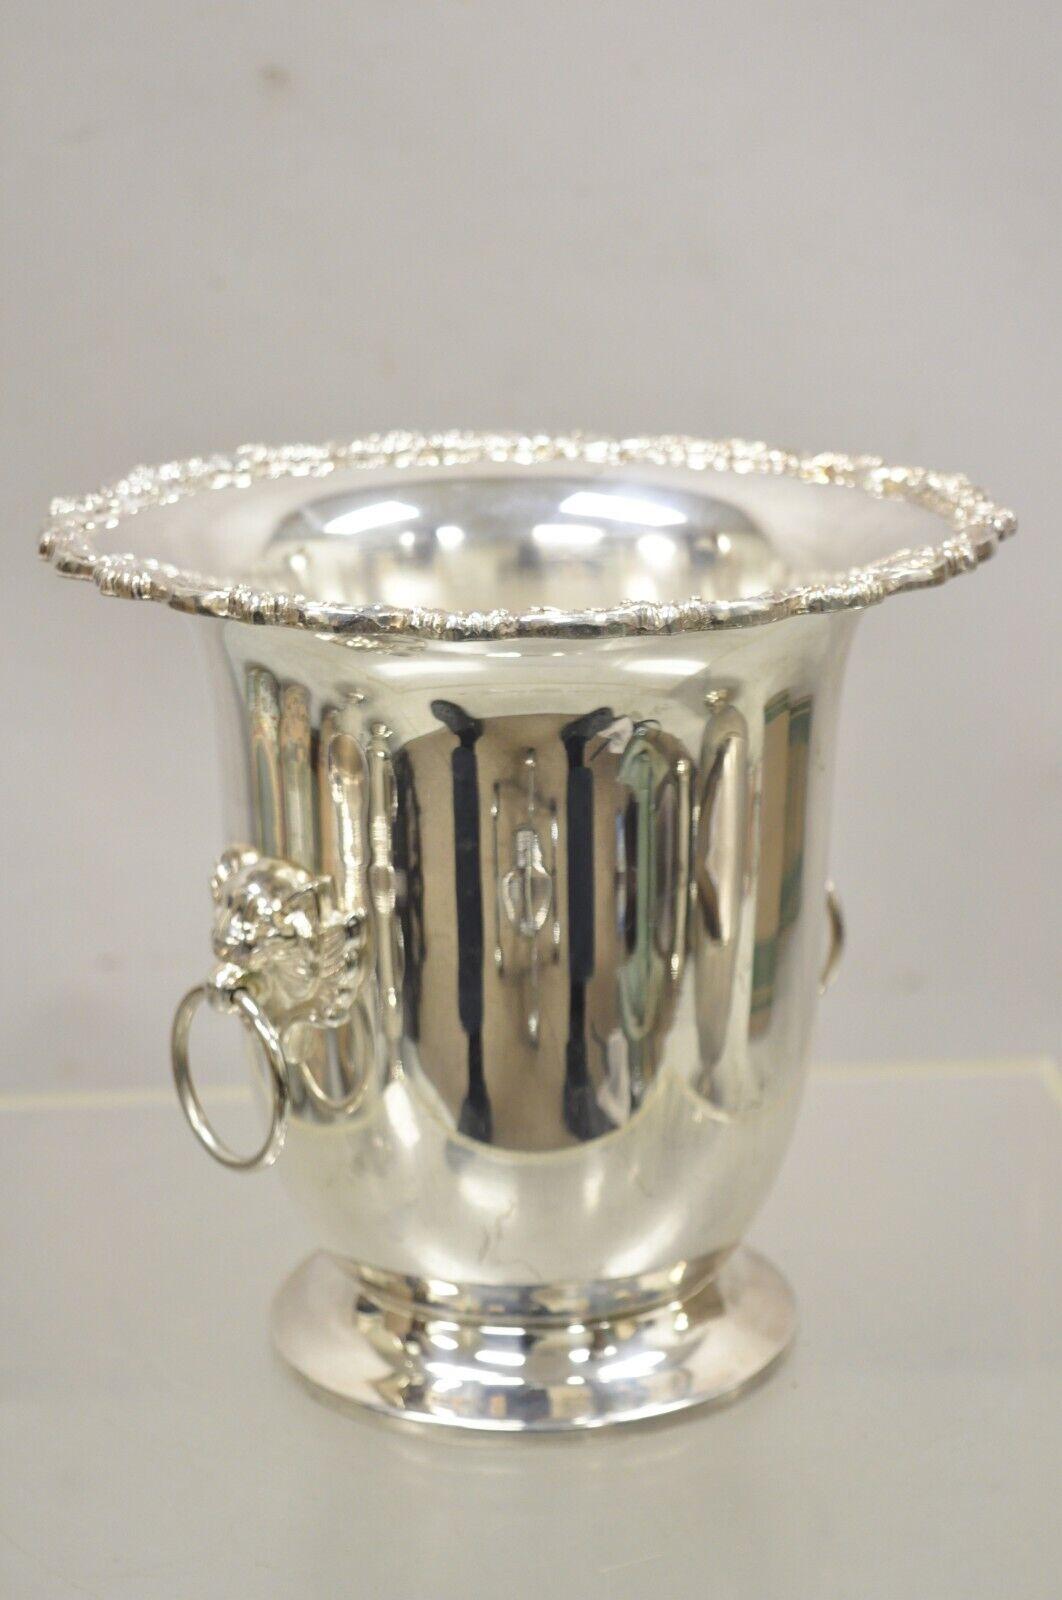 Vintage Newport Gorham silver plated trophy cup champagne chiller wine ice bucket twin lion handles. Item features twin drop ring lion head handles, shapely fluted form, original stamp, quality craftsmanship, great style and form. Circa early to